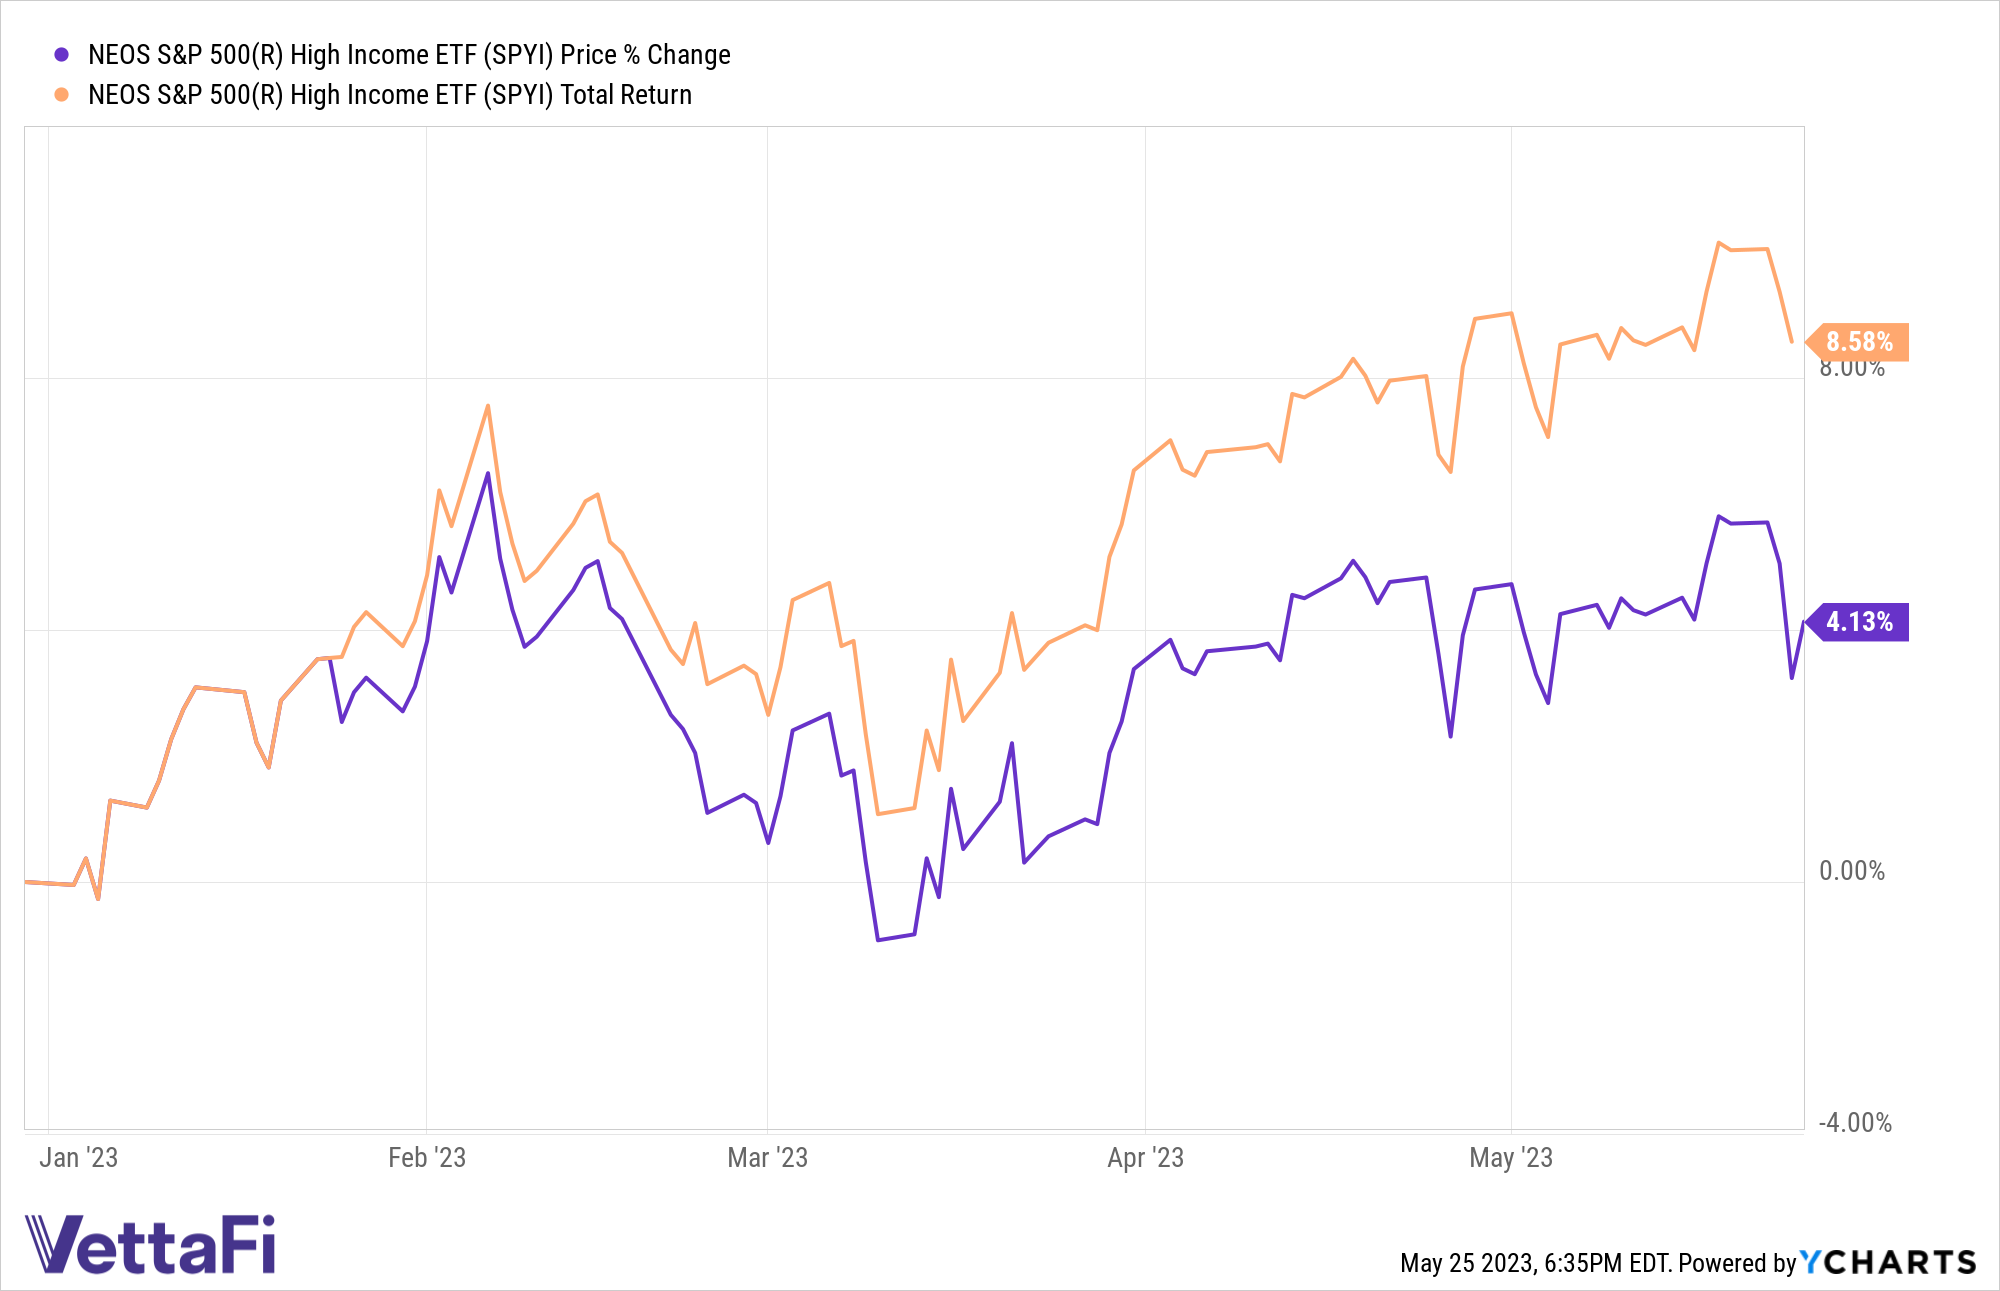 Chart of SPYI price performance (up 4.13%) and total returns (up 8.58 as of 05/24) YTD. Stellar stock performance by Nvidia carried the S&P 500 and SPYI higher 05/25.